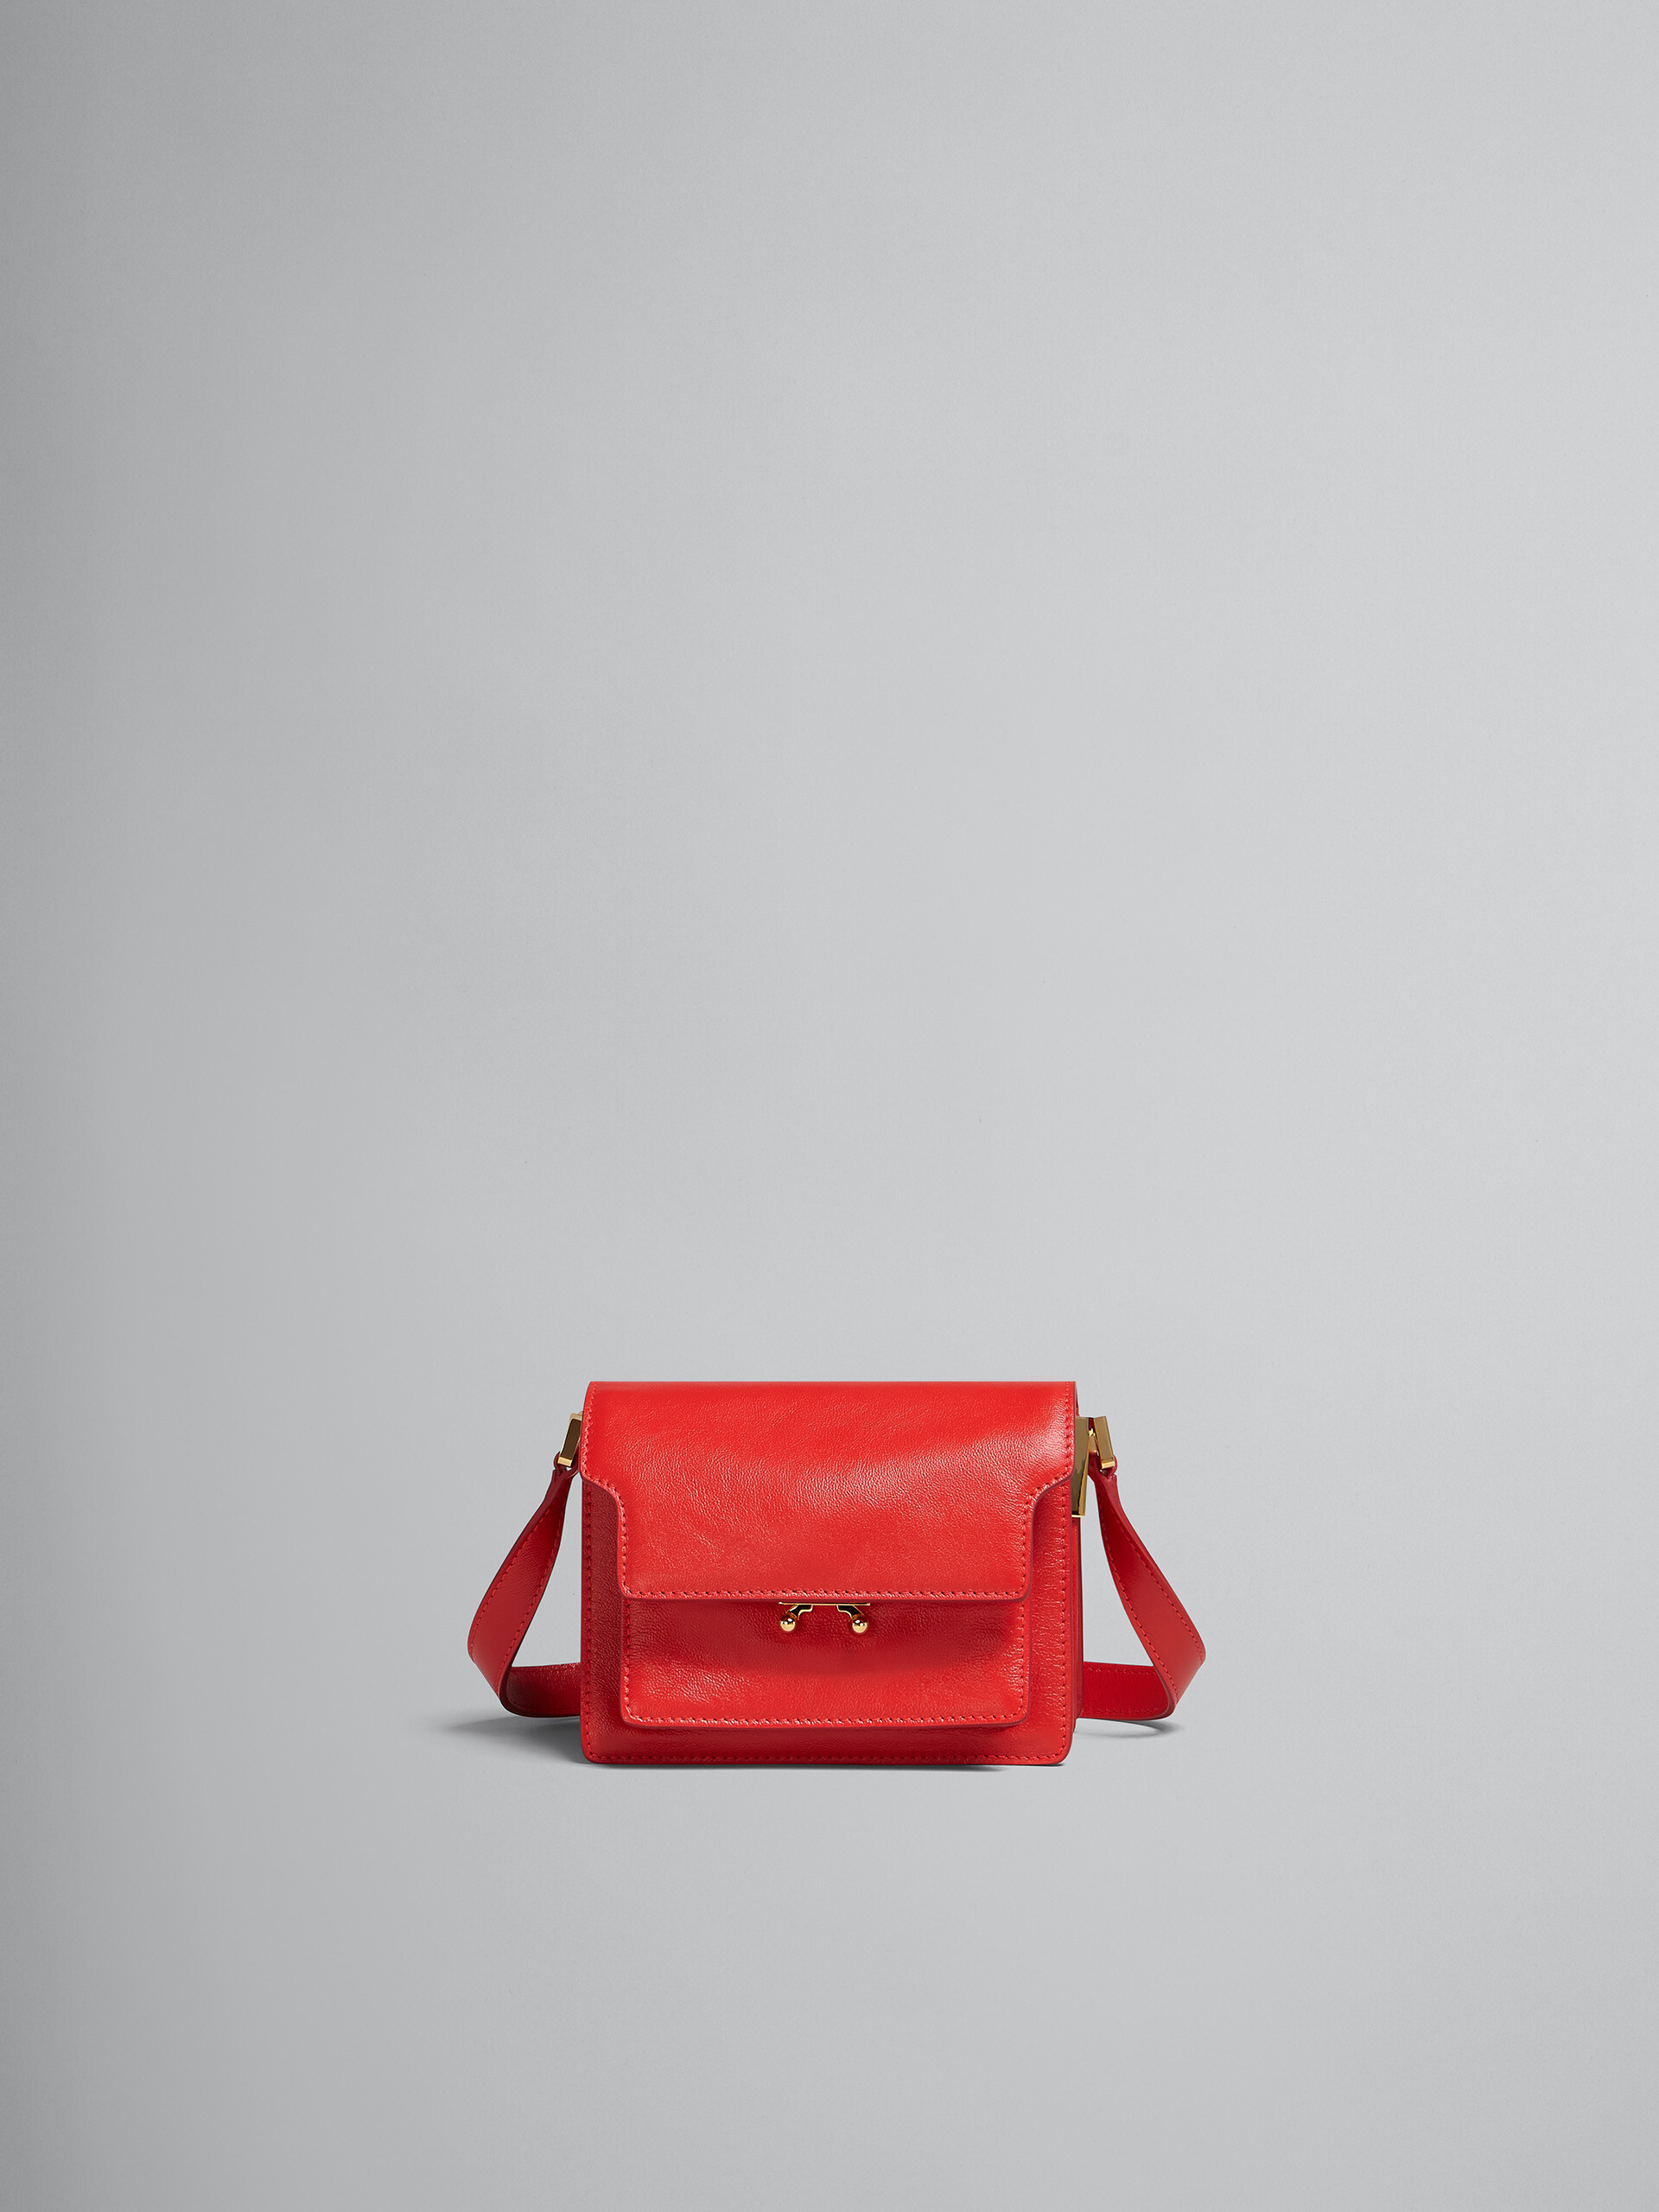 TRUNK SOFT mini bag in red leather - Shoulder Bags - Image 1